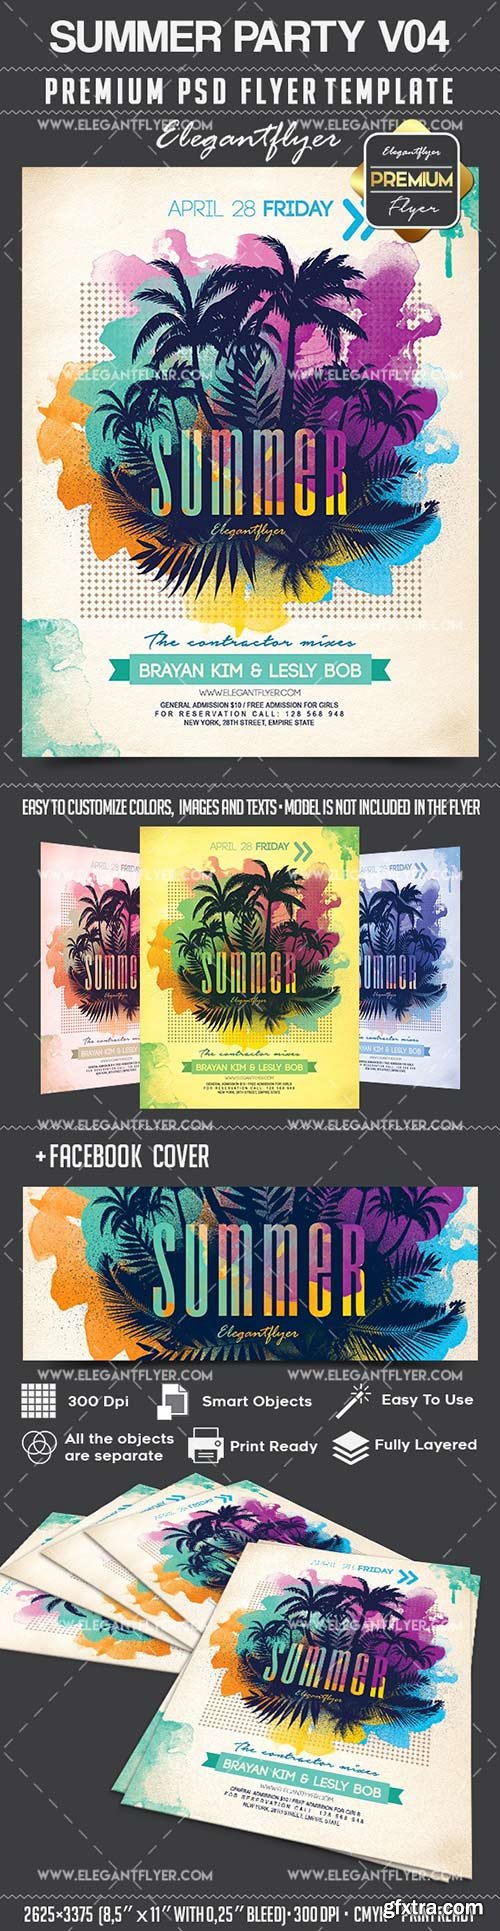 Summer Party V04 – Flyer PSD Template + Facebook Cover